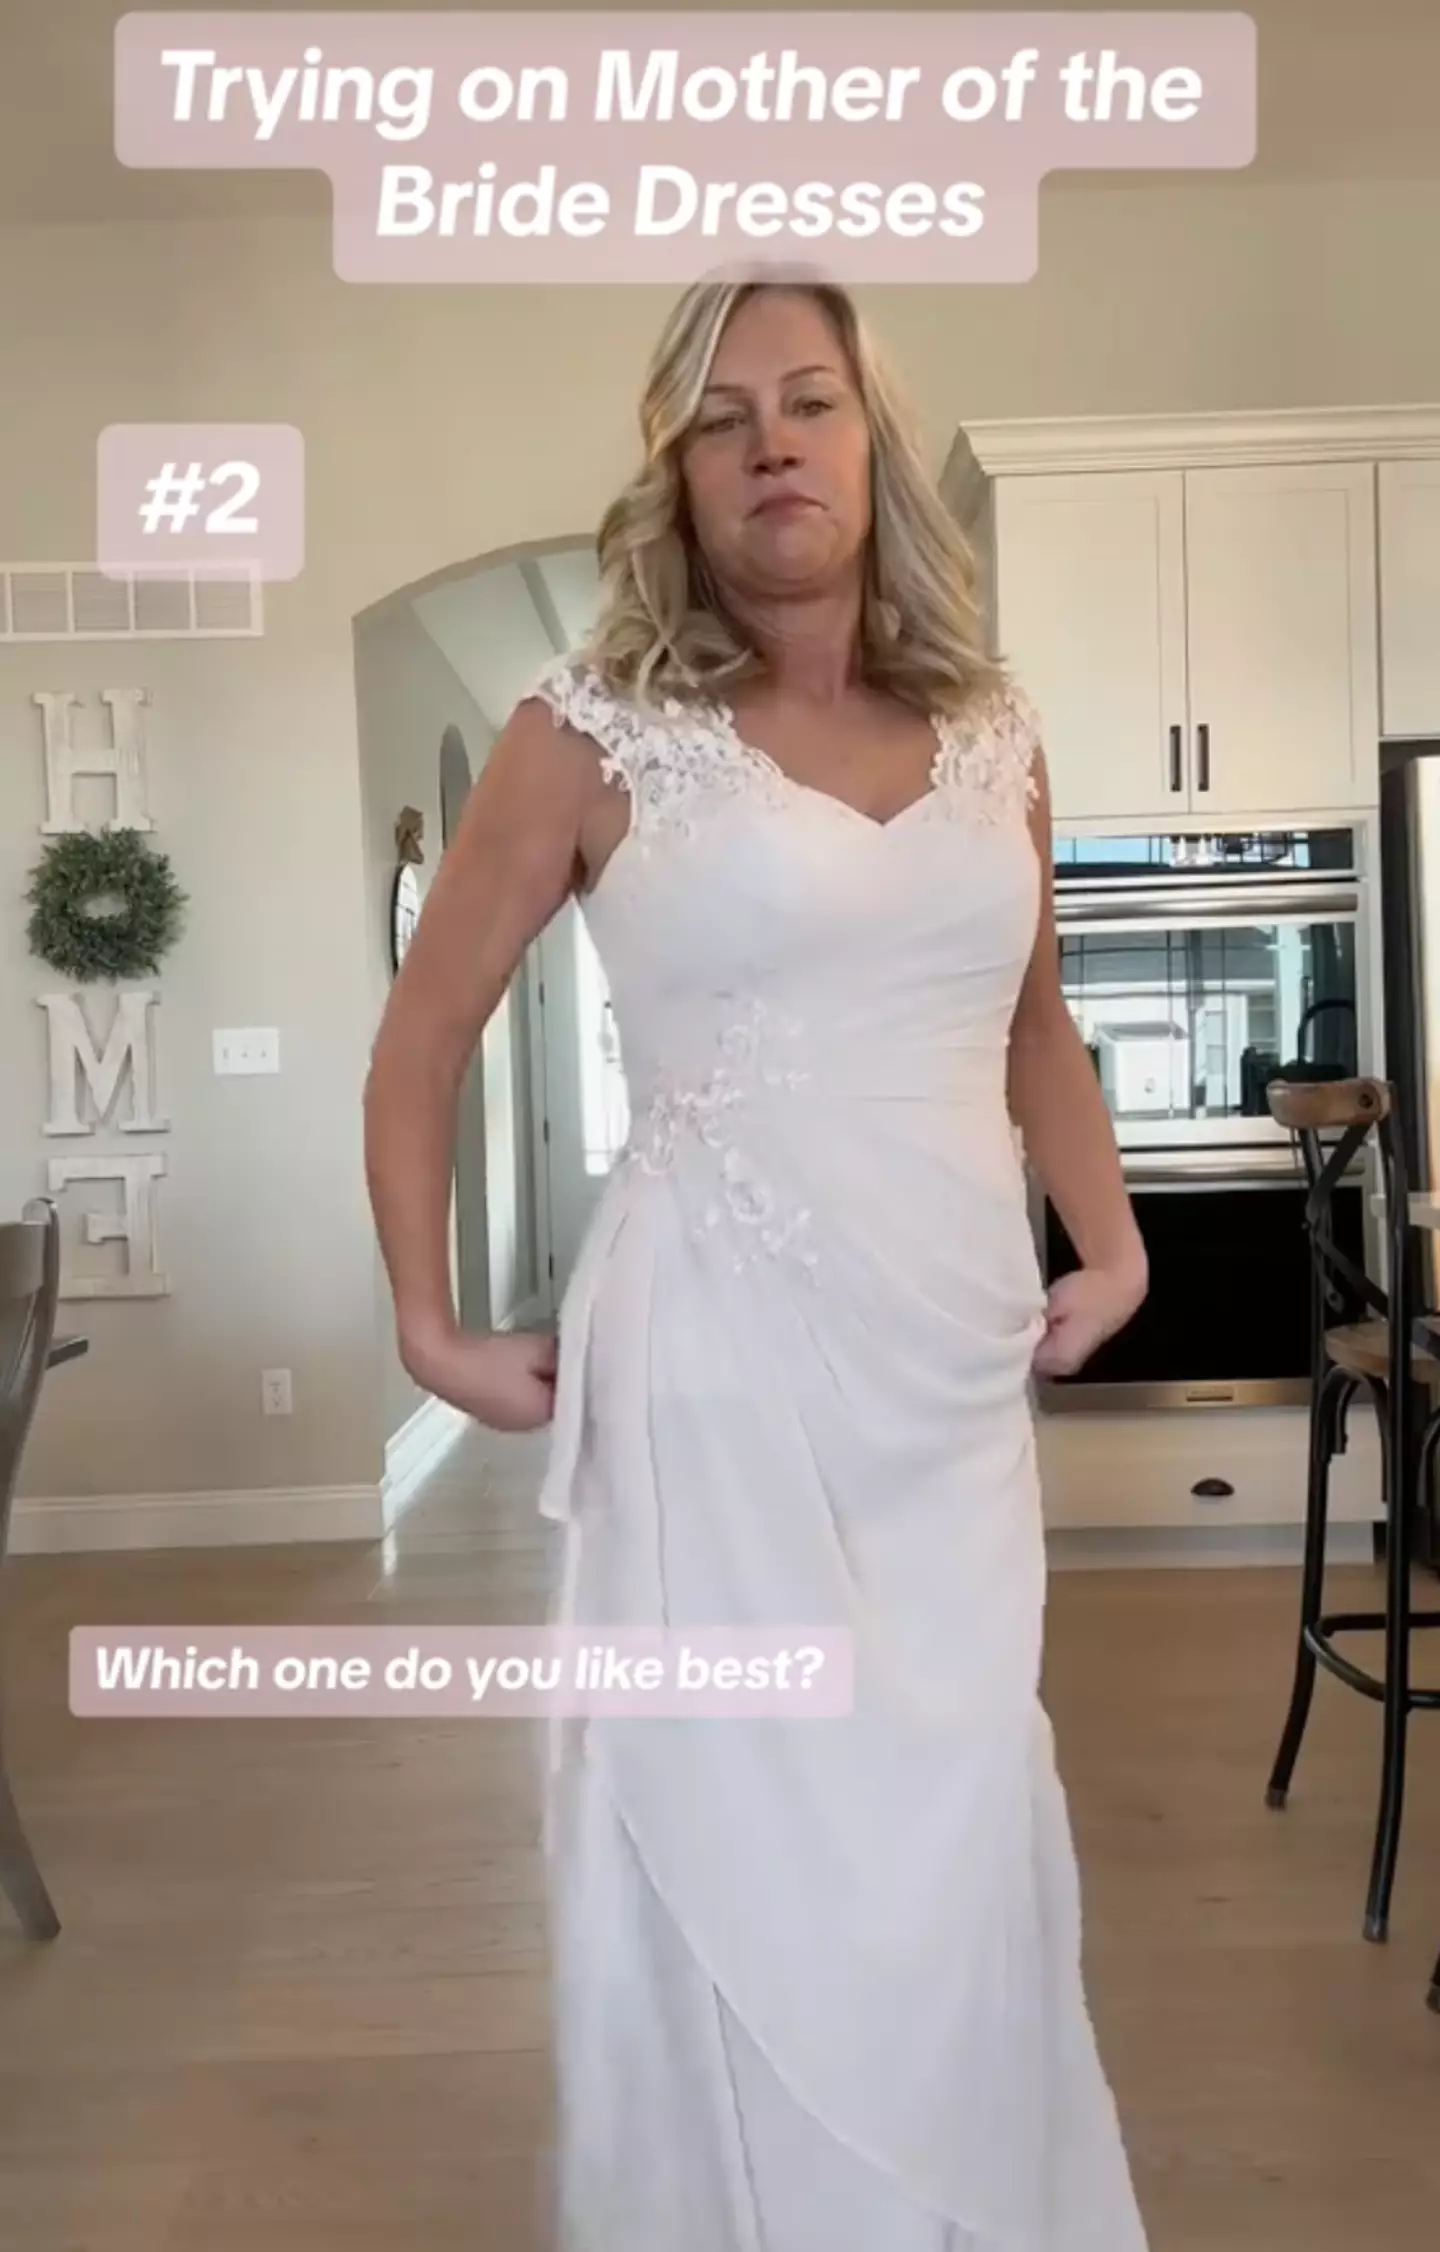 Stacey showed off multiple white dresses.